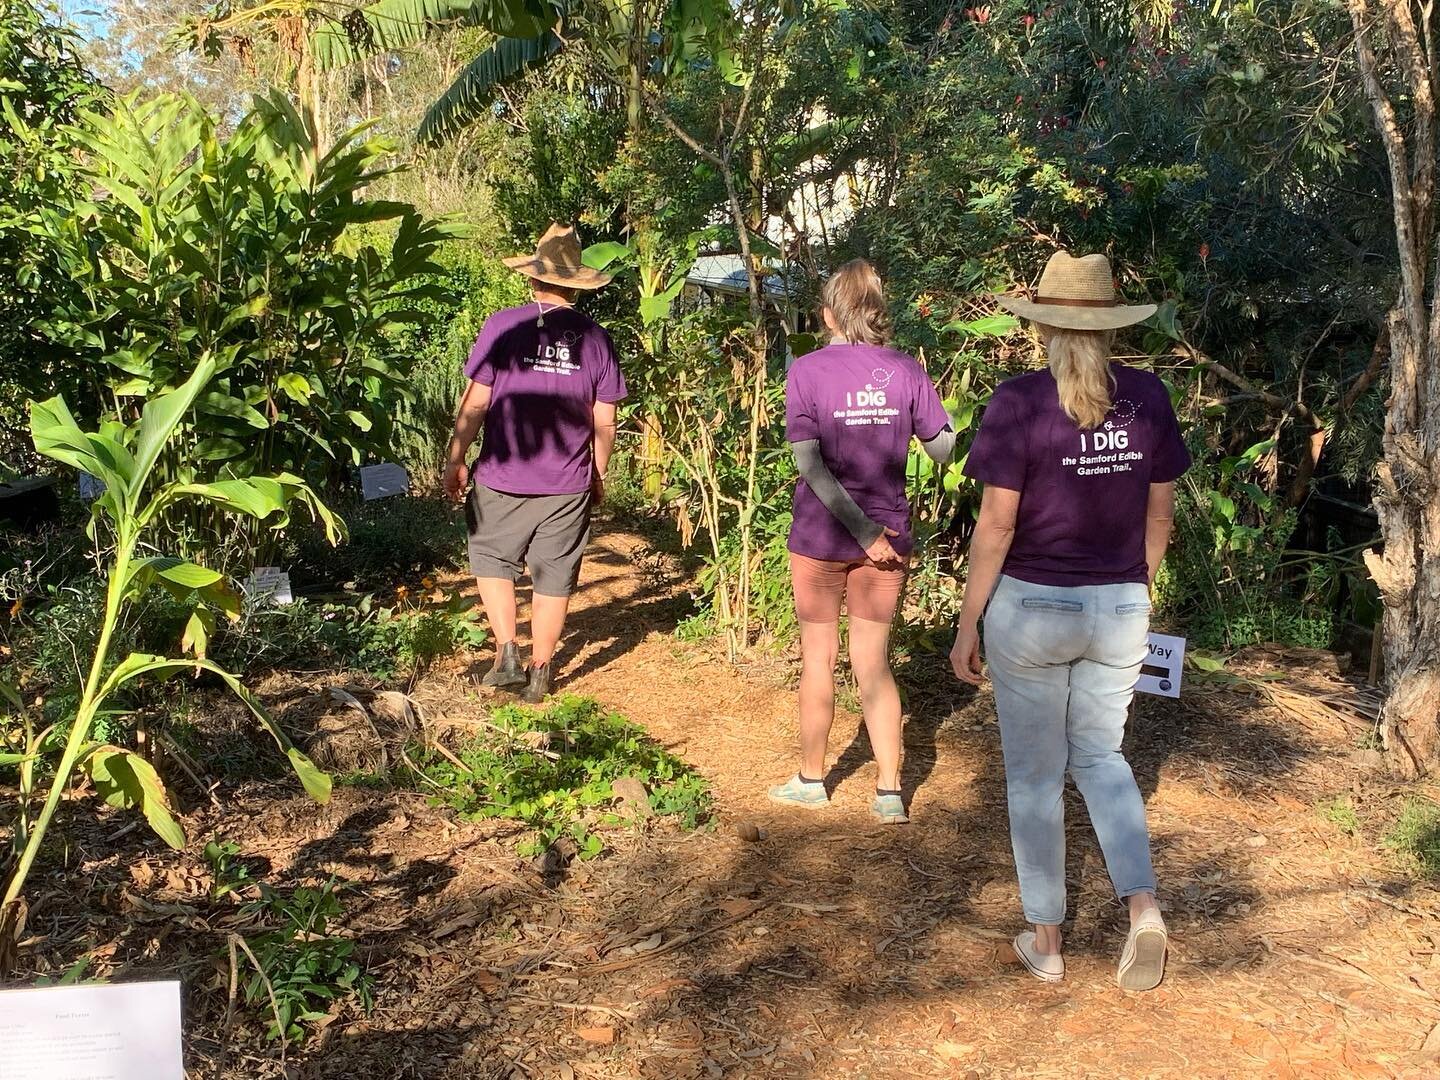 Thank you to my amazing volunteers today. I could not have opened the garden without you. Thank you Melissa, Glenn, Max and Lauren for greeting our visitors and answering question. Thank you Mum for having food ready and keeping the dogs happy and Ju